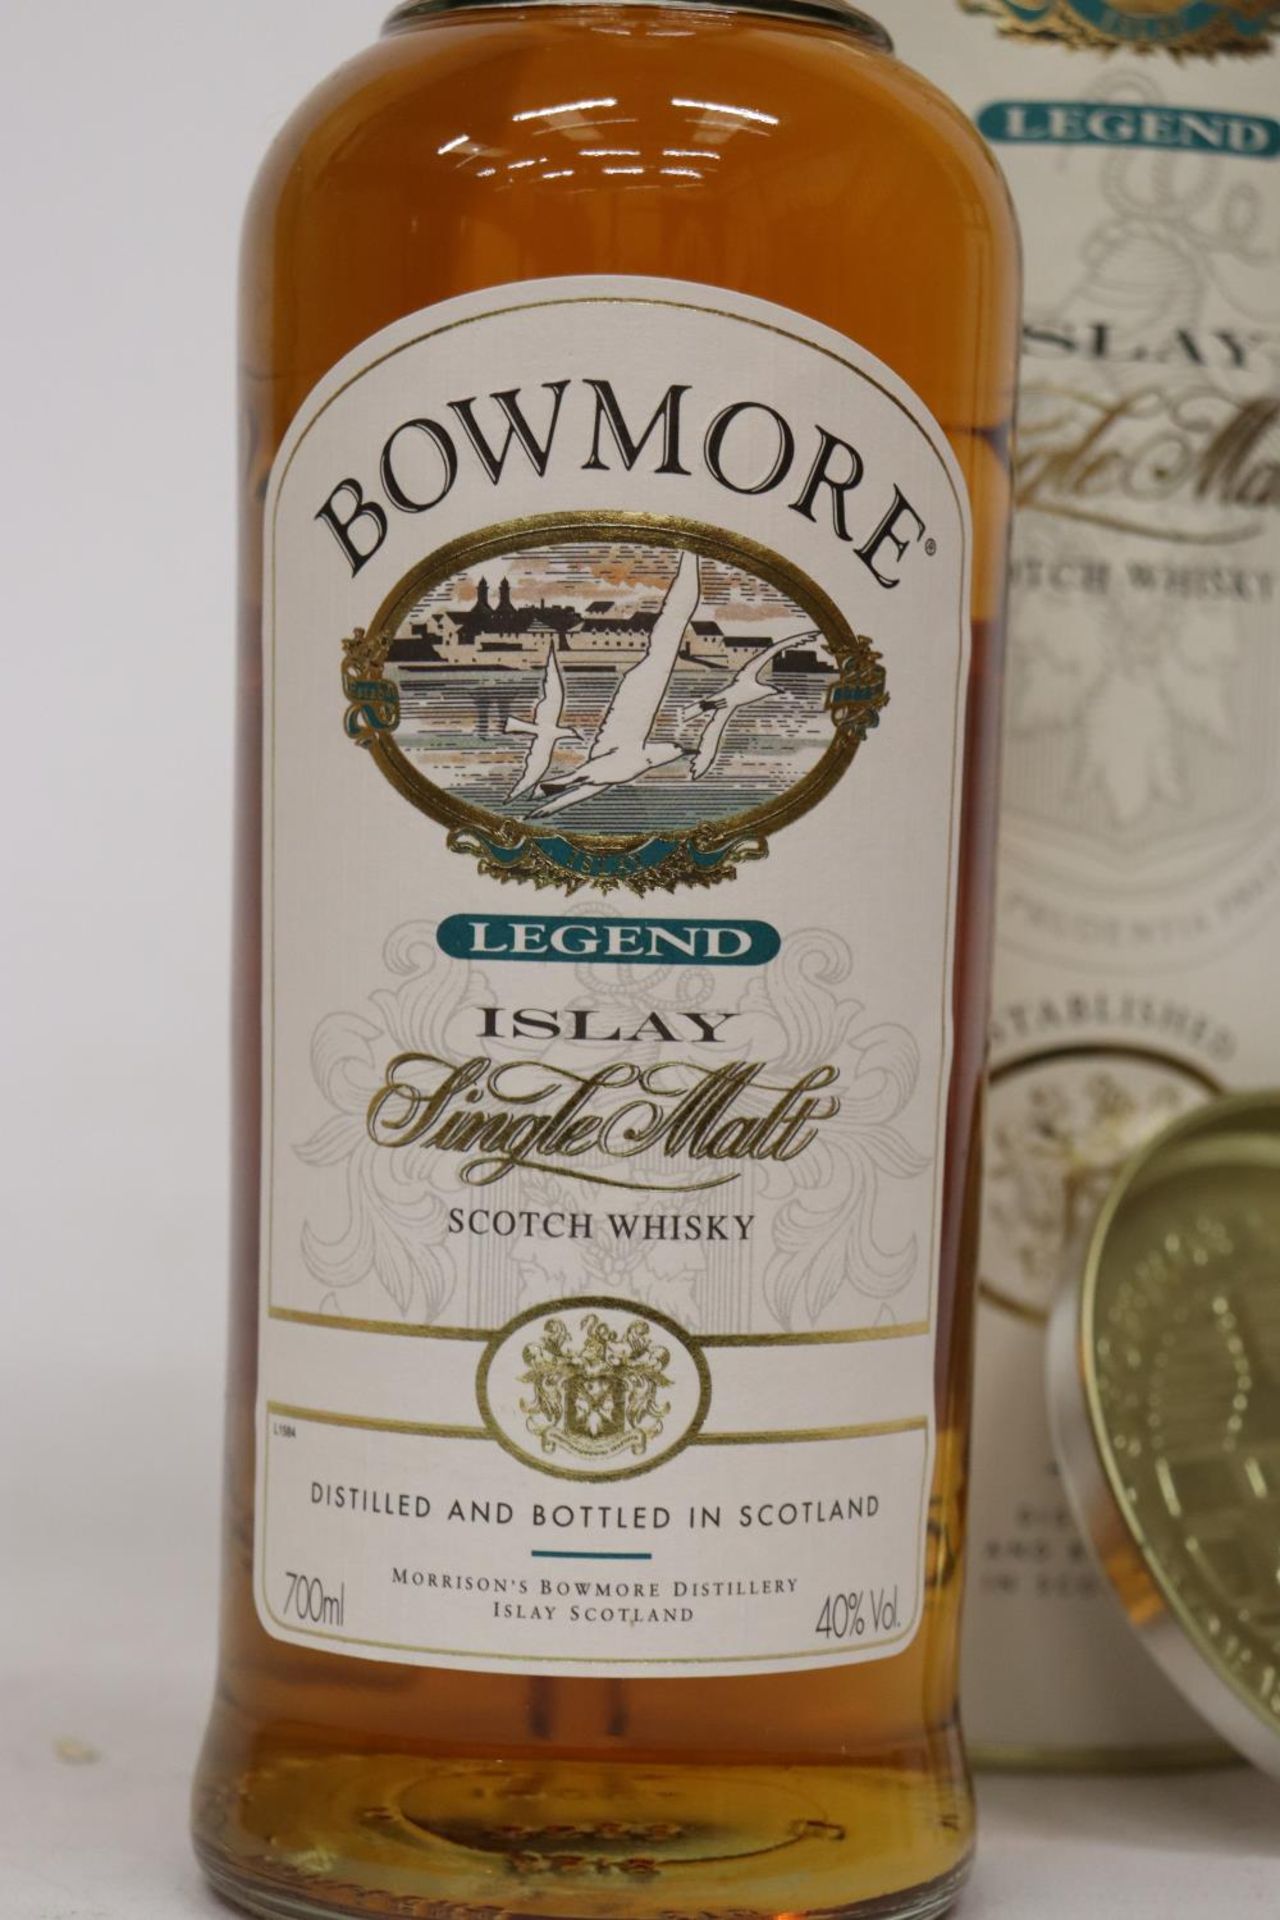 A BOTTLE OF BOWMORE LEGEND ISLAY SINGLE MALT WHISKY, BOXED - Image 5 of 5